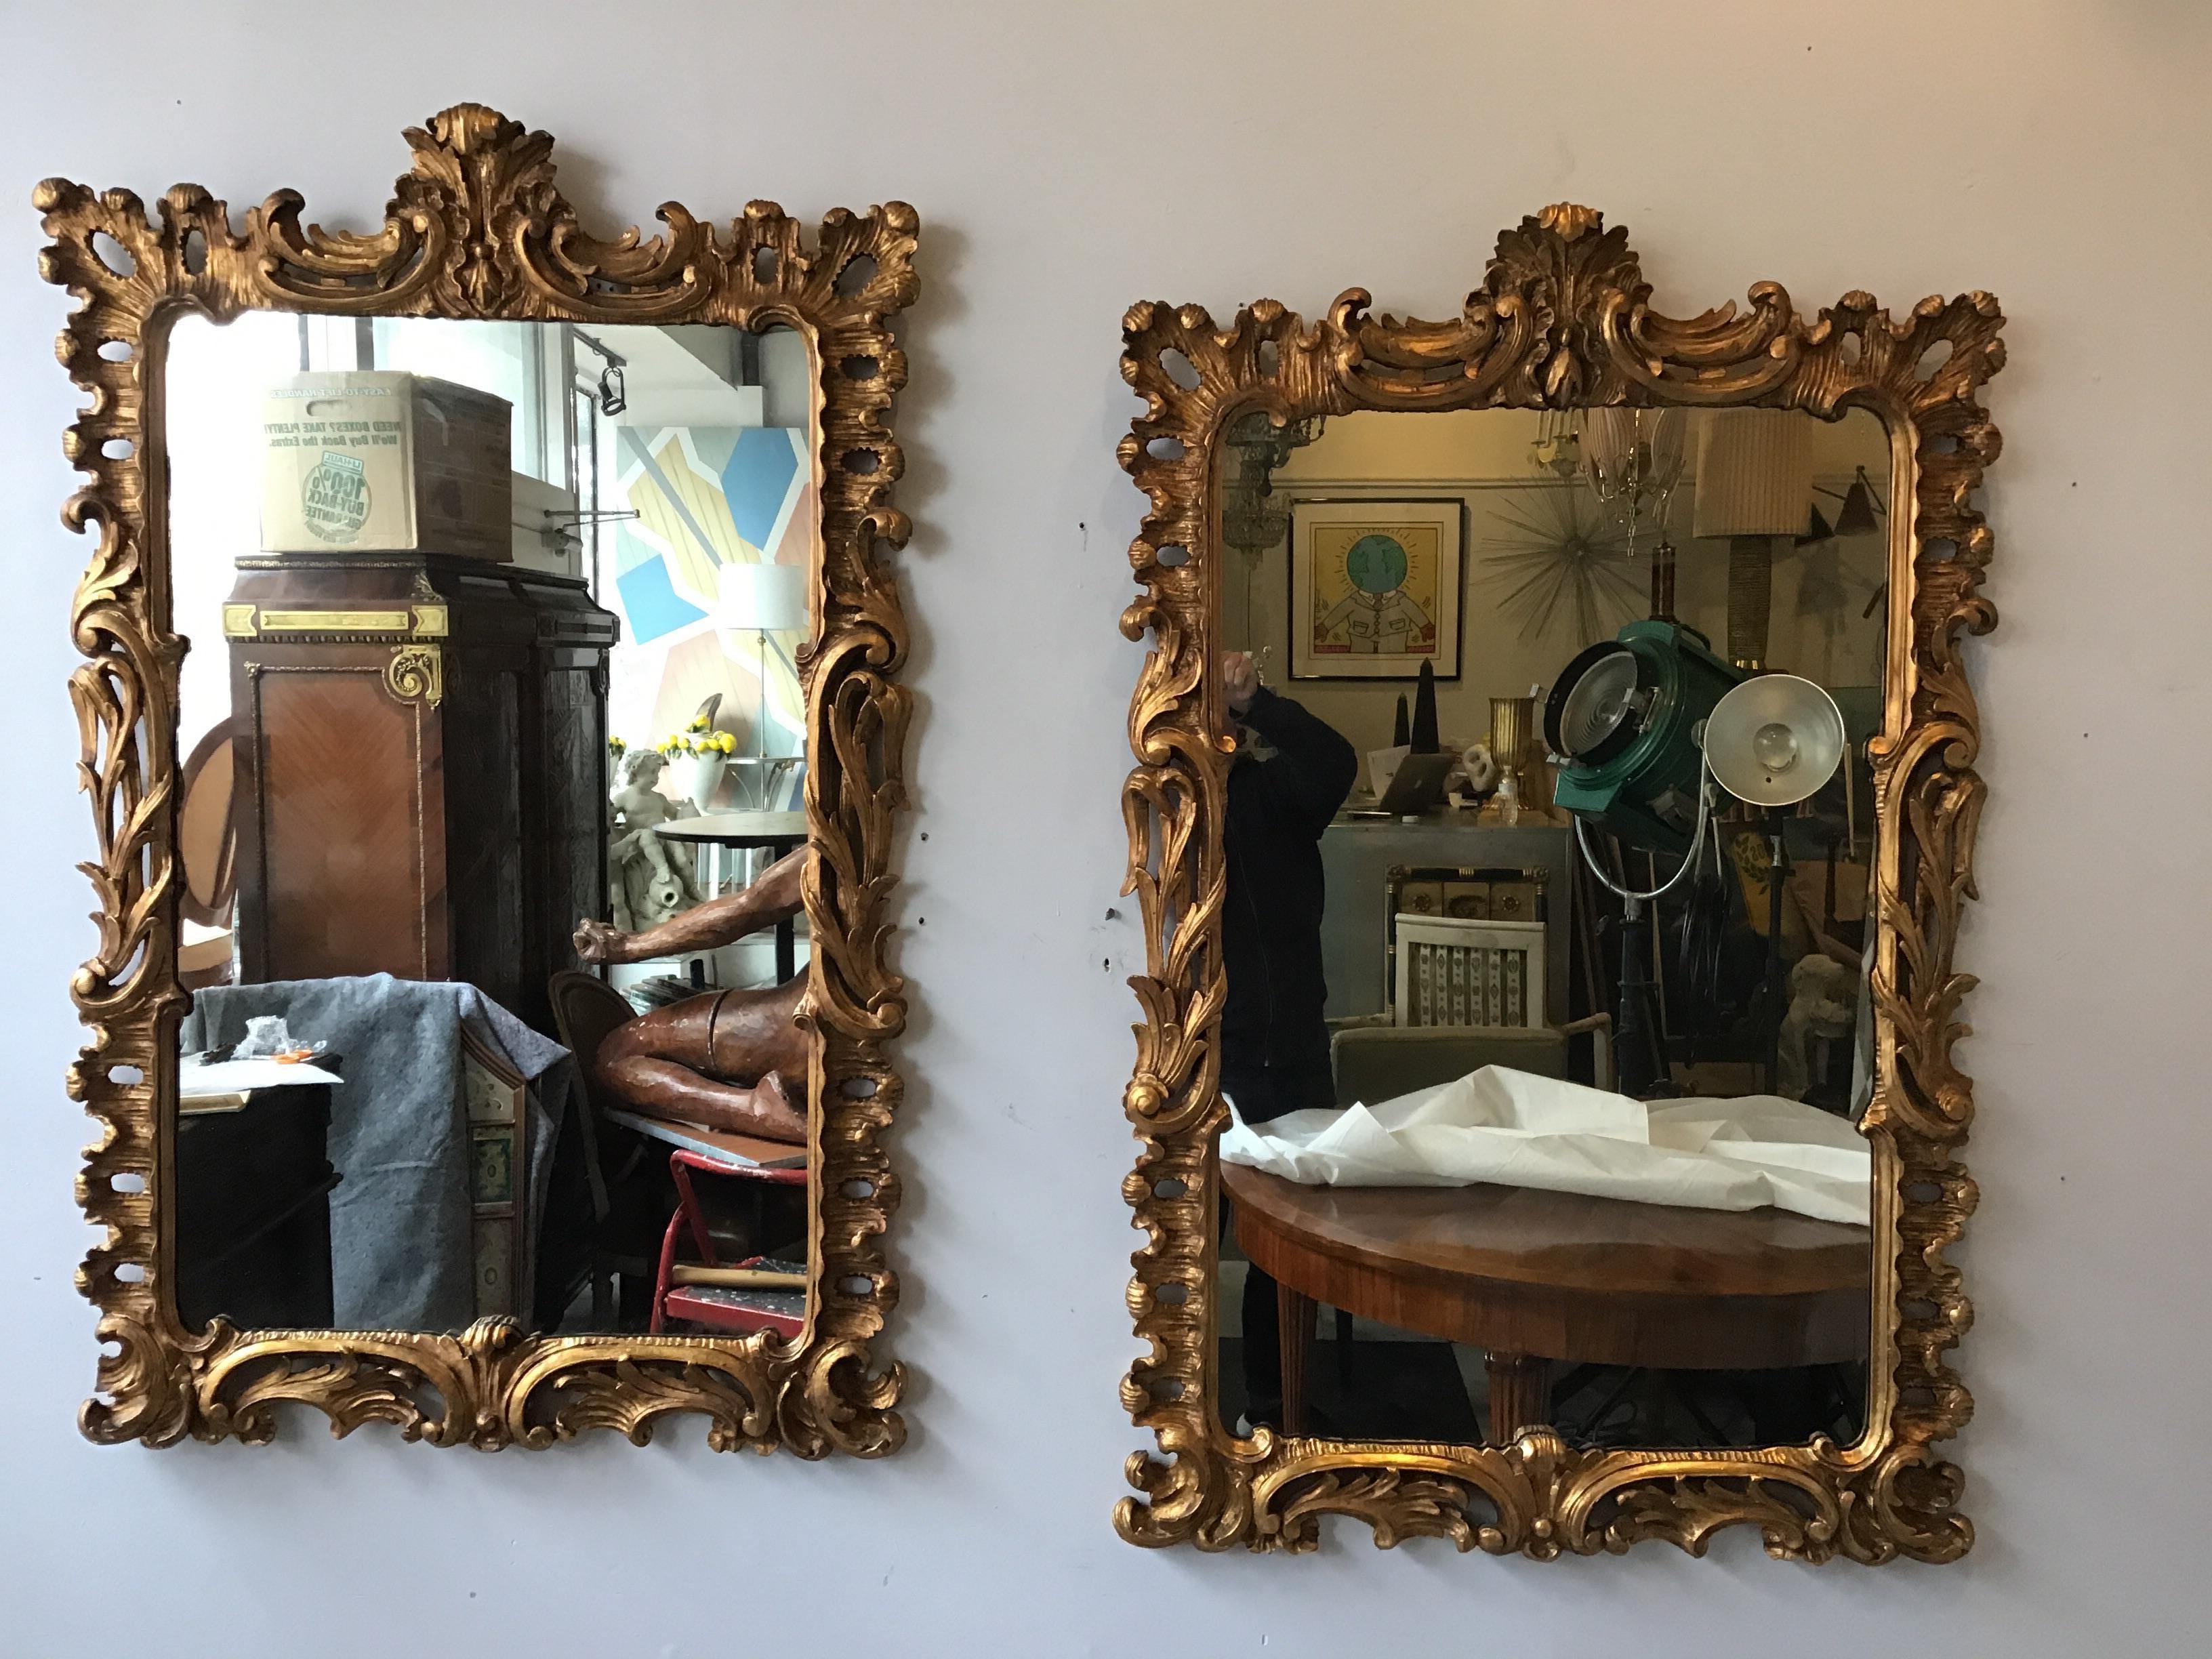 Pair of 1940s carved wood gilt mirrors from Harris Interiors Arts, New York City.